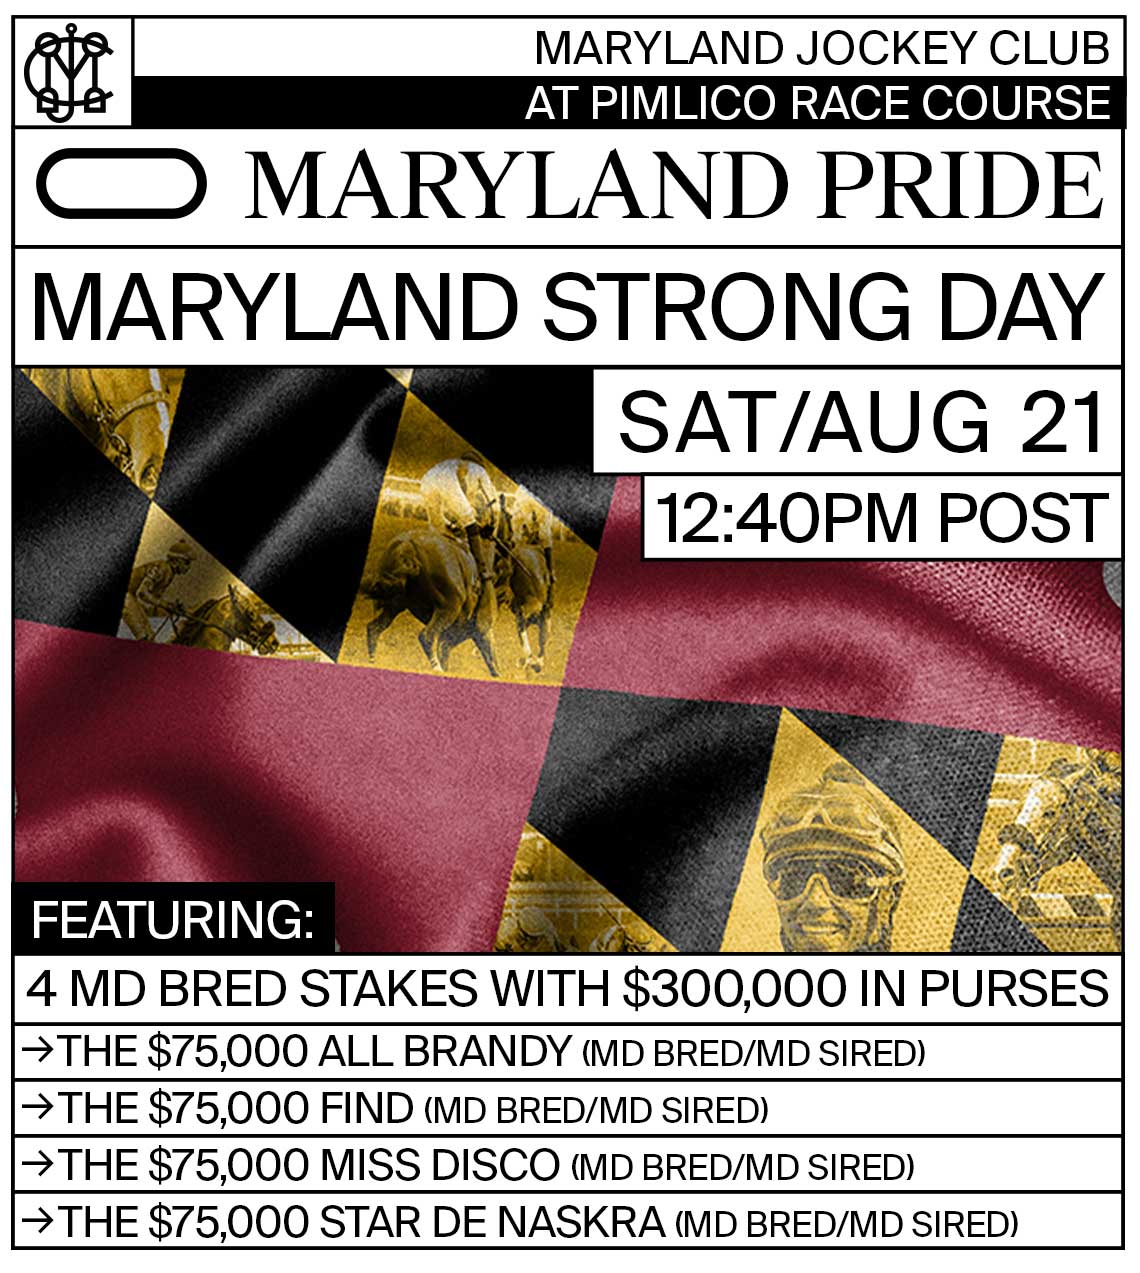 Maryland Pride / Maryland Strong Day Pimlico